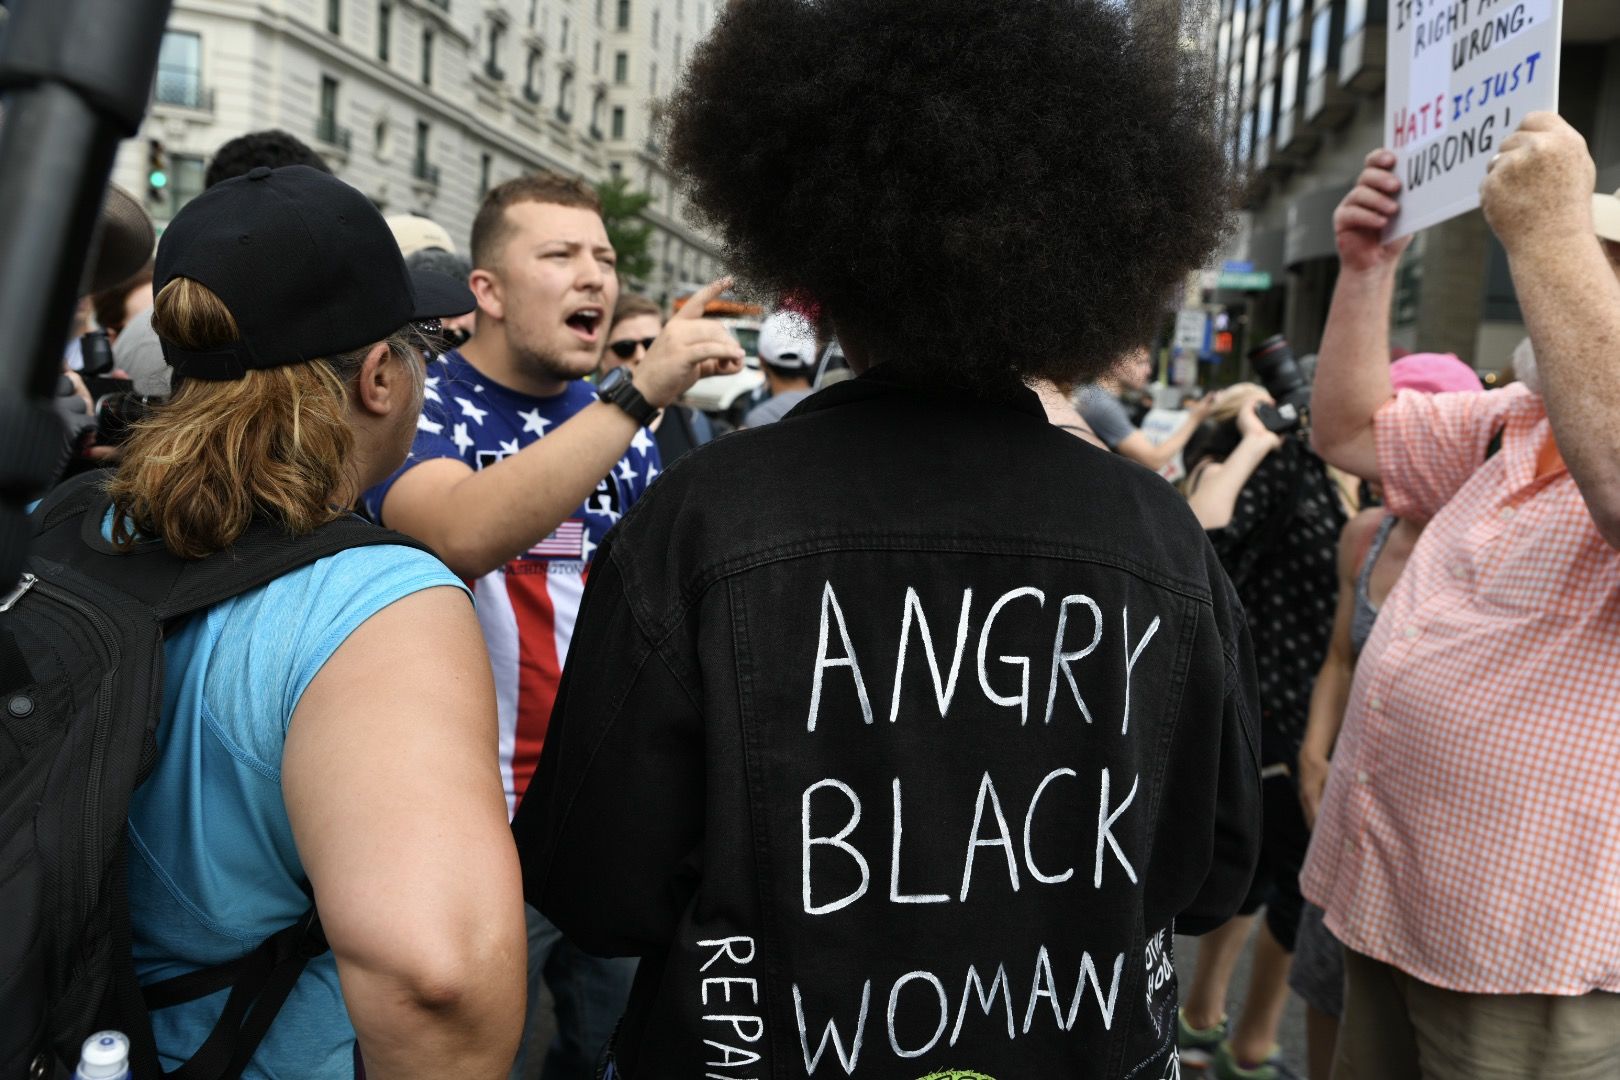 A supporter of President Donald Trump is surrounded by counter-protesters to a far-right event in Washington, D.C.’s Freedom Plaza on July 6, 2019. Trump supporters and anti-fascist organizers held dueling rallies across the street from each other, leading to high tensions as D.C. and U.S. Park Police largely held the peace. (WTOP/Alejandro Alvarez)